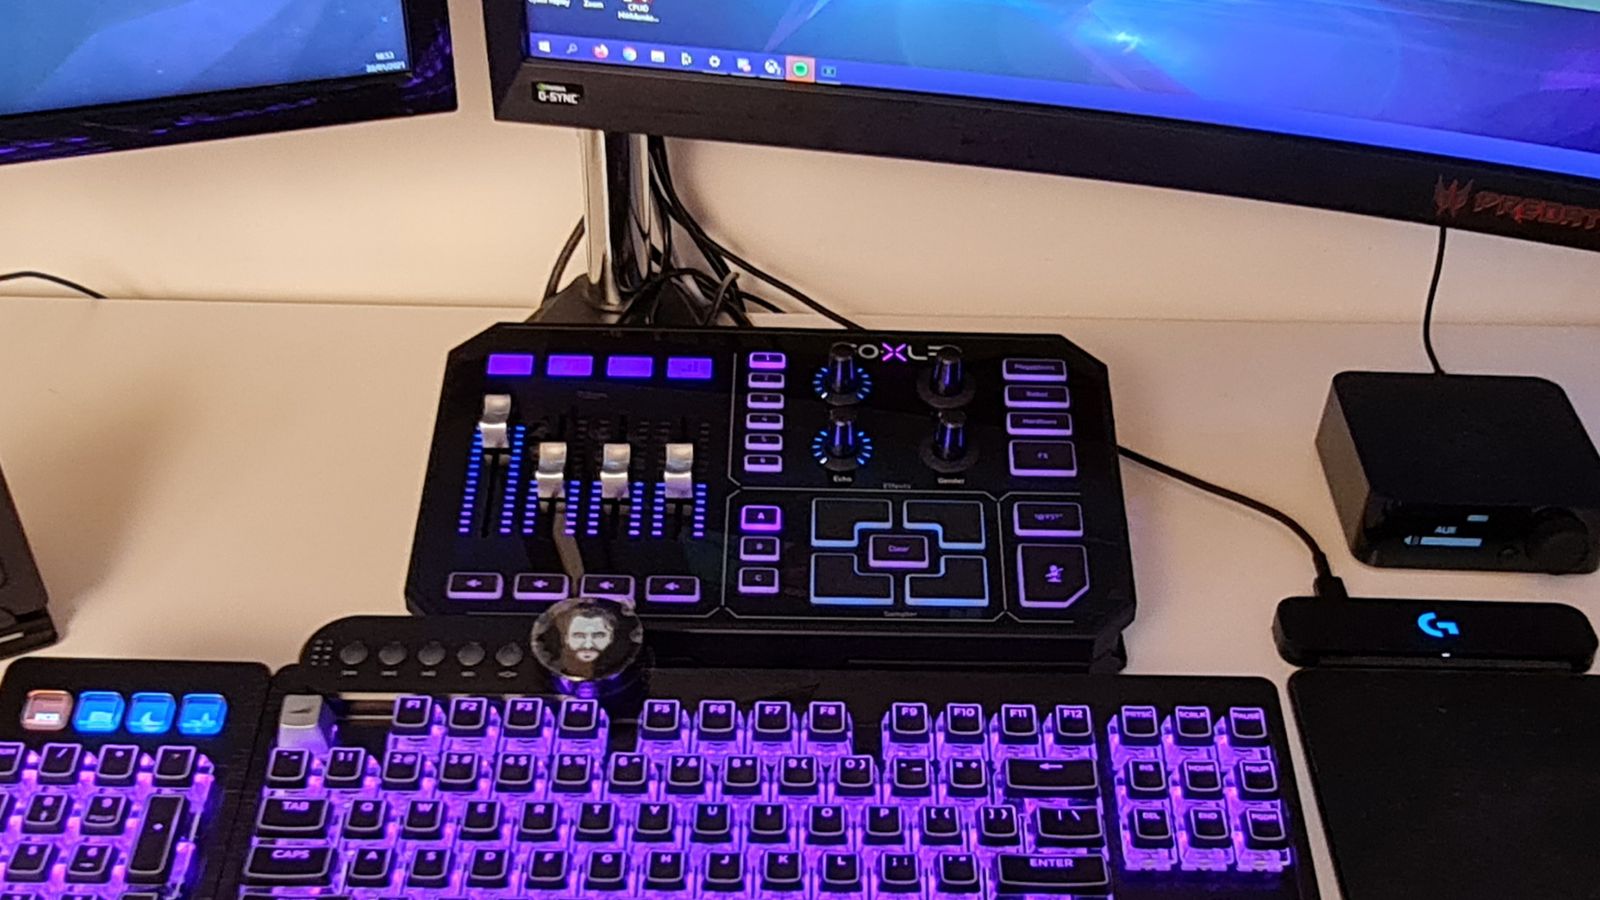 A GoXLR with purple and blue lighting sits above an RGB keyboard